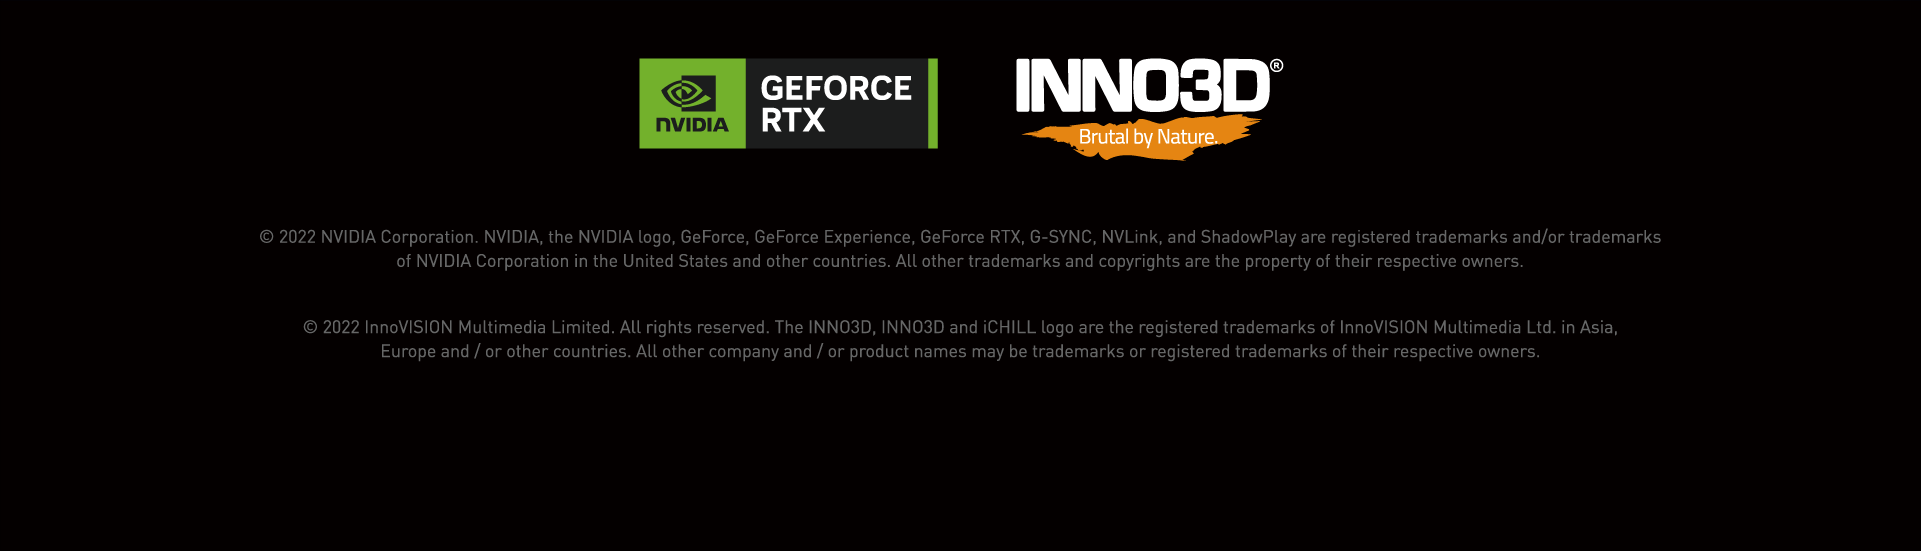 © 2022 NVIDIA Corporation. NVIDIA, the NVIDIA logo, GeForce, GeForce Experience, GeForce RTX, G-SYNC, NVLink, and ShadowPlay are registered trademarks and/or trademarks
of NVIDIA Corporation in the United States and other countries. All other trademarks and copyrights are the property of their respective owners.© 2022 InnoVISION Multimedia Limited. All rights reserved. The INNO3D, INNO3D and iCHILL logo are the registered trademarks of InnoVISION Multimedia Ltd. in Asia,
Europe and / or other countries. All other company and / or product names may be trademarks or registered trademarks of their respective owners.